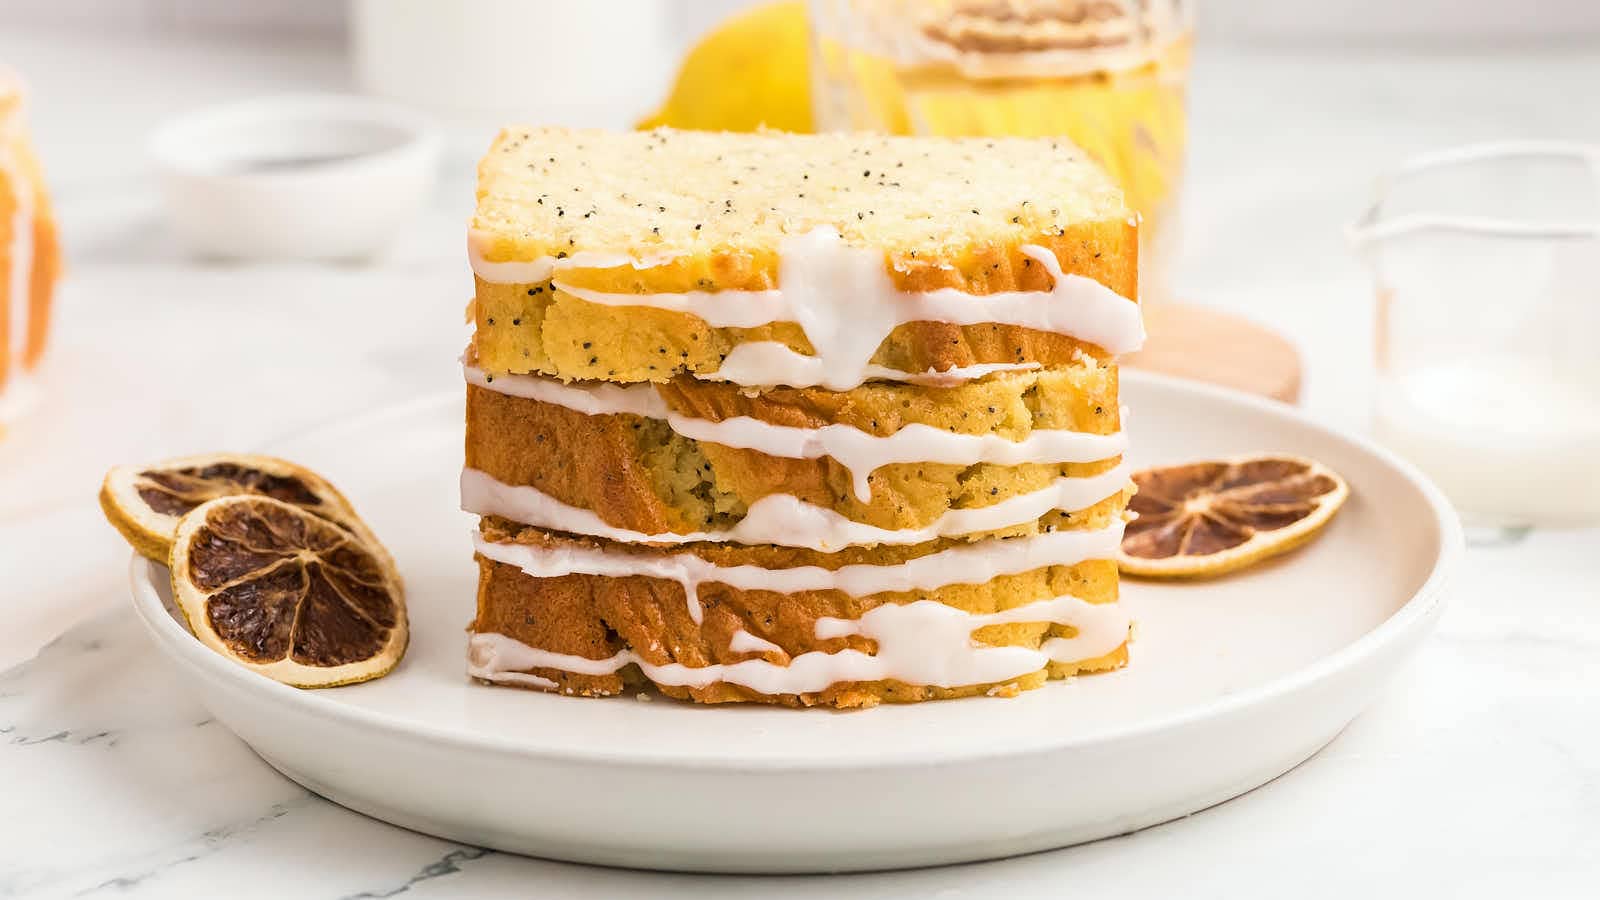 Lemon Poppy Seed Loaf recipe by Cheerful Cook.